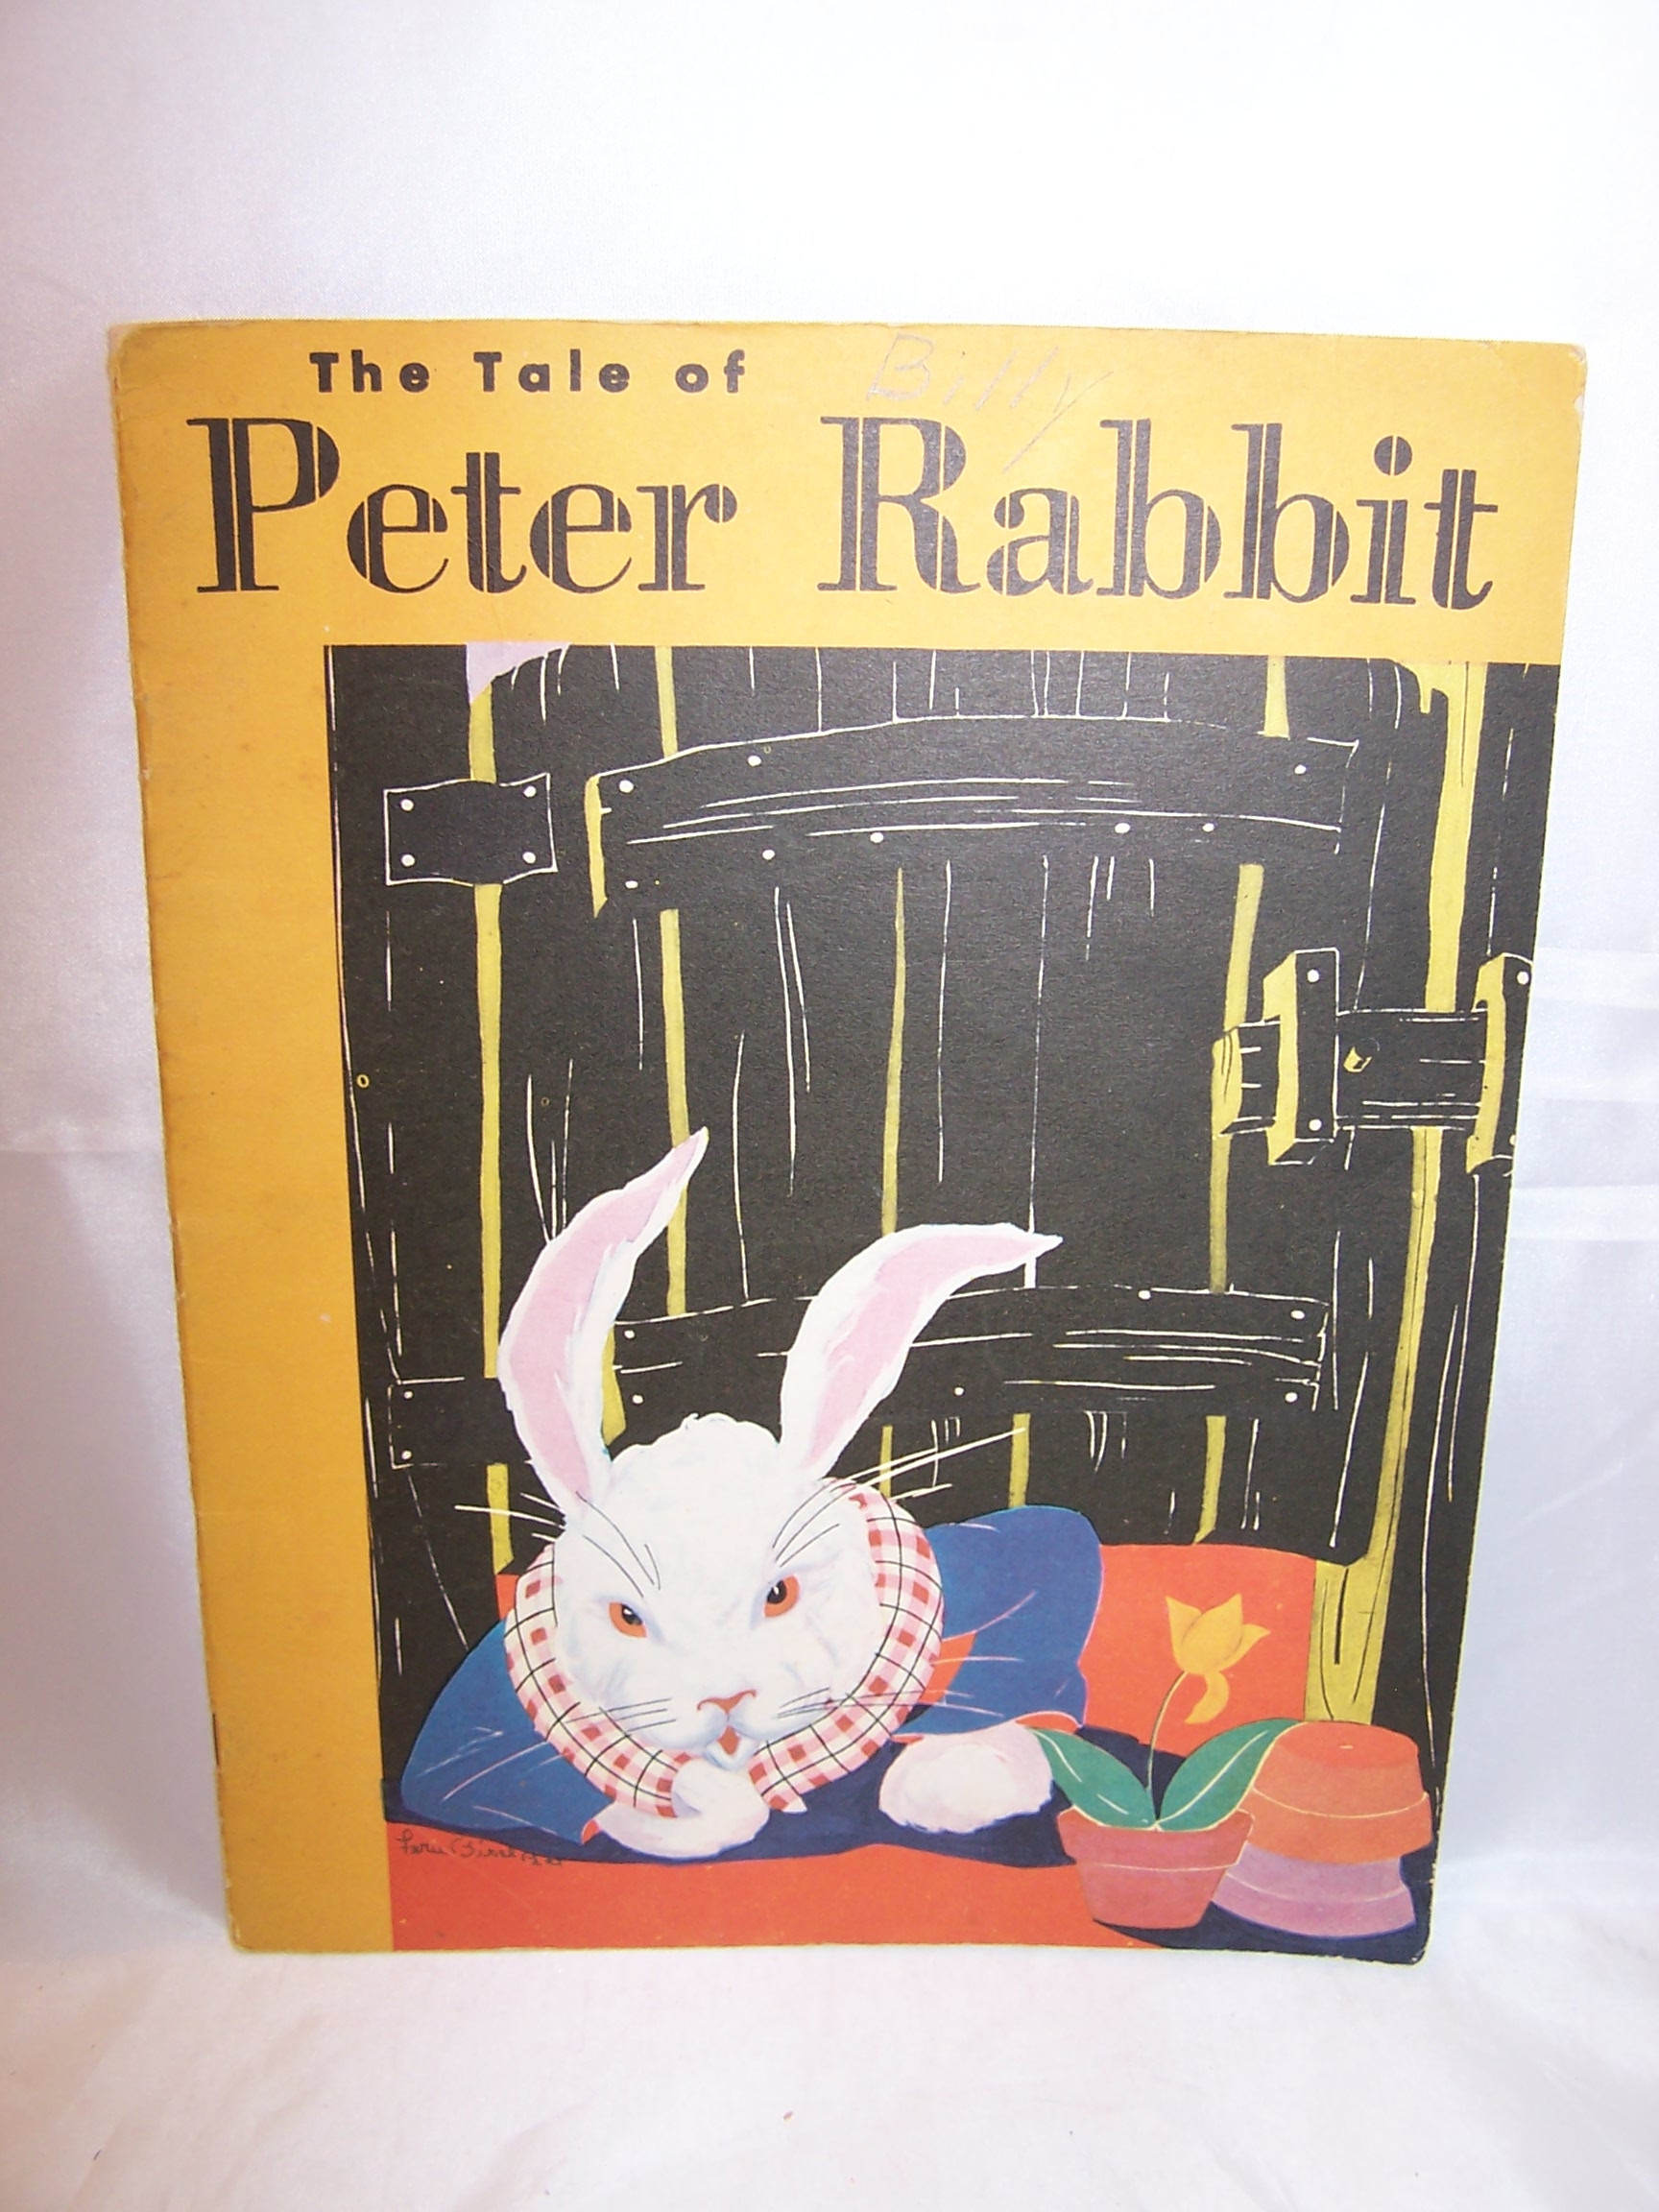 Peter Rabbit Book, Storybook, 1946, Aldredge and McKee, Prang Company Publishers